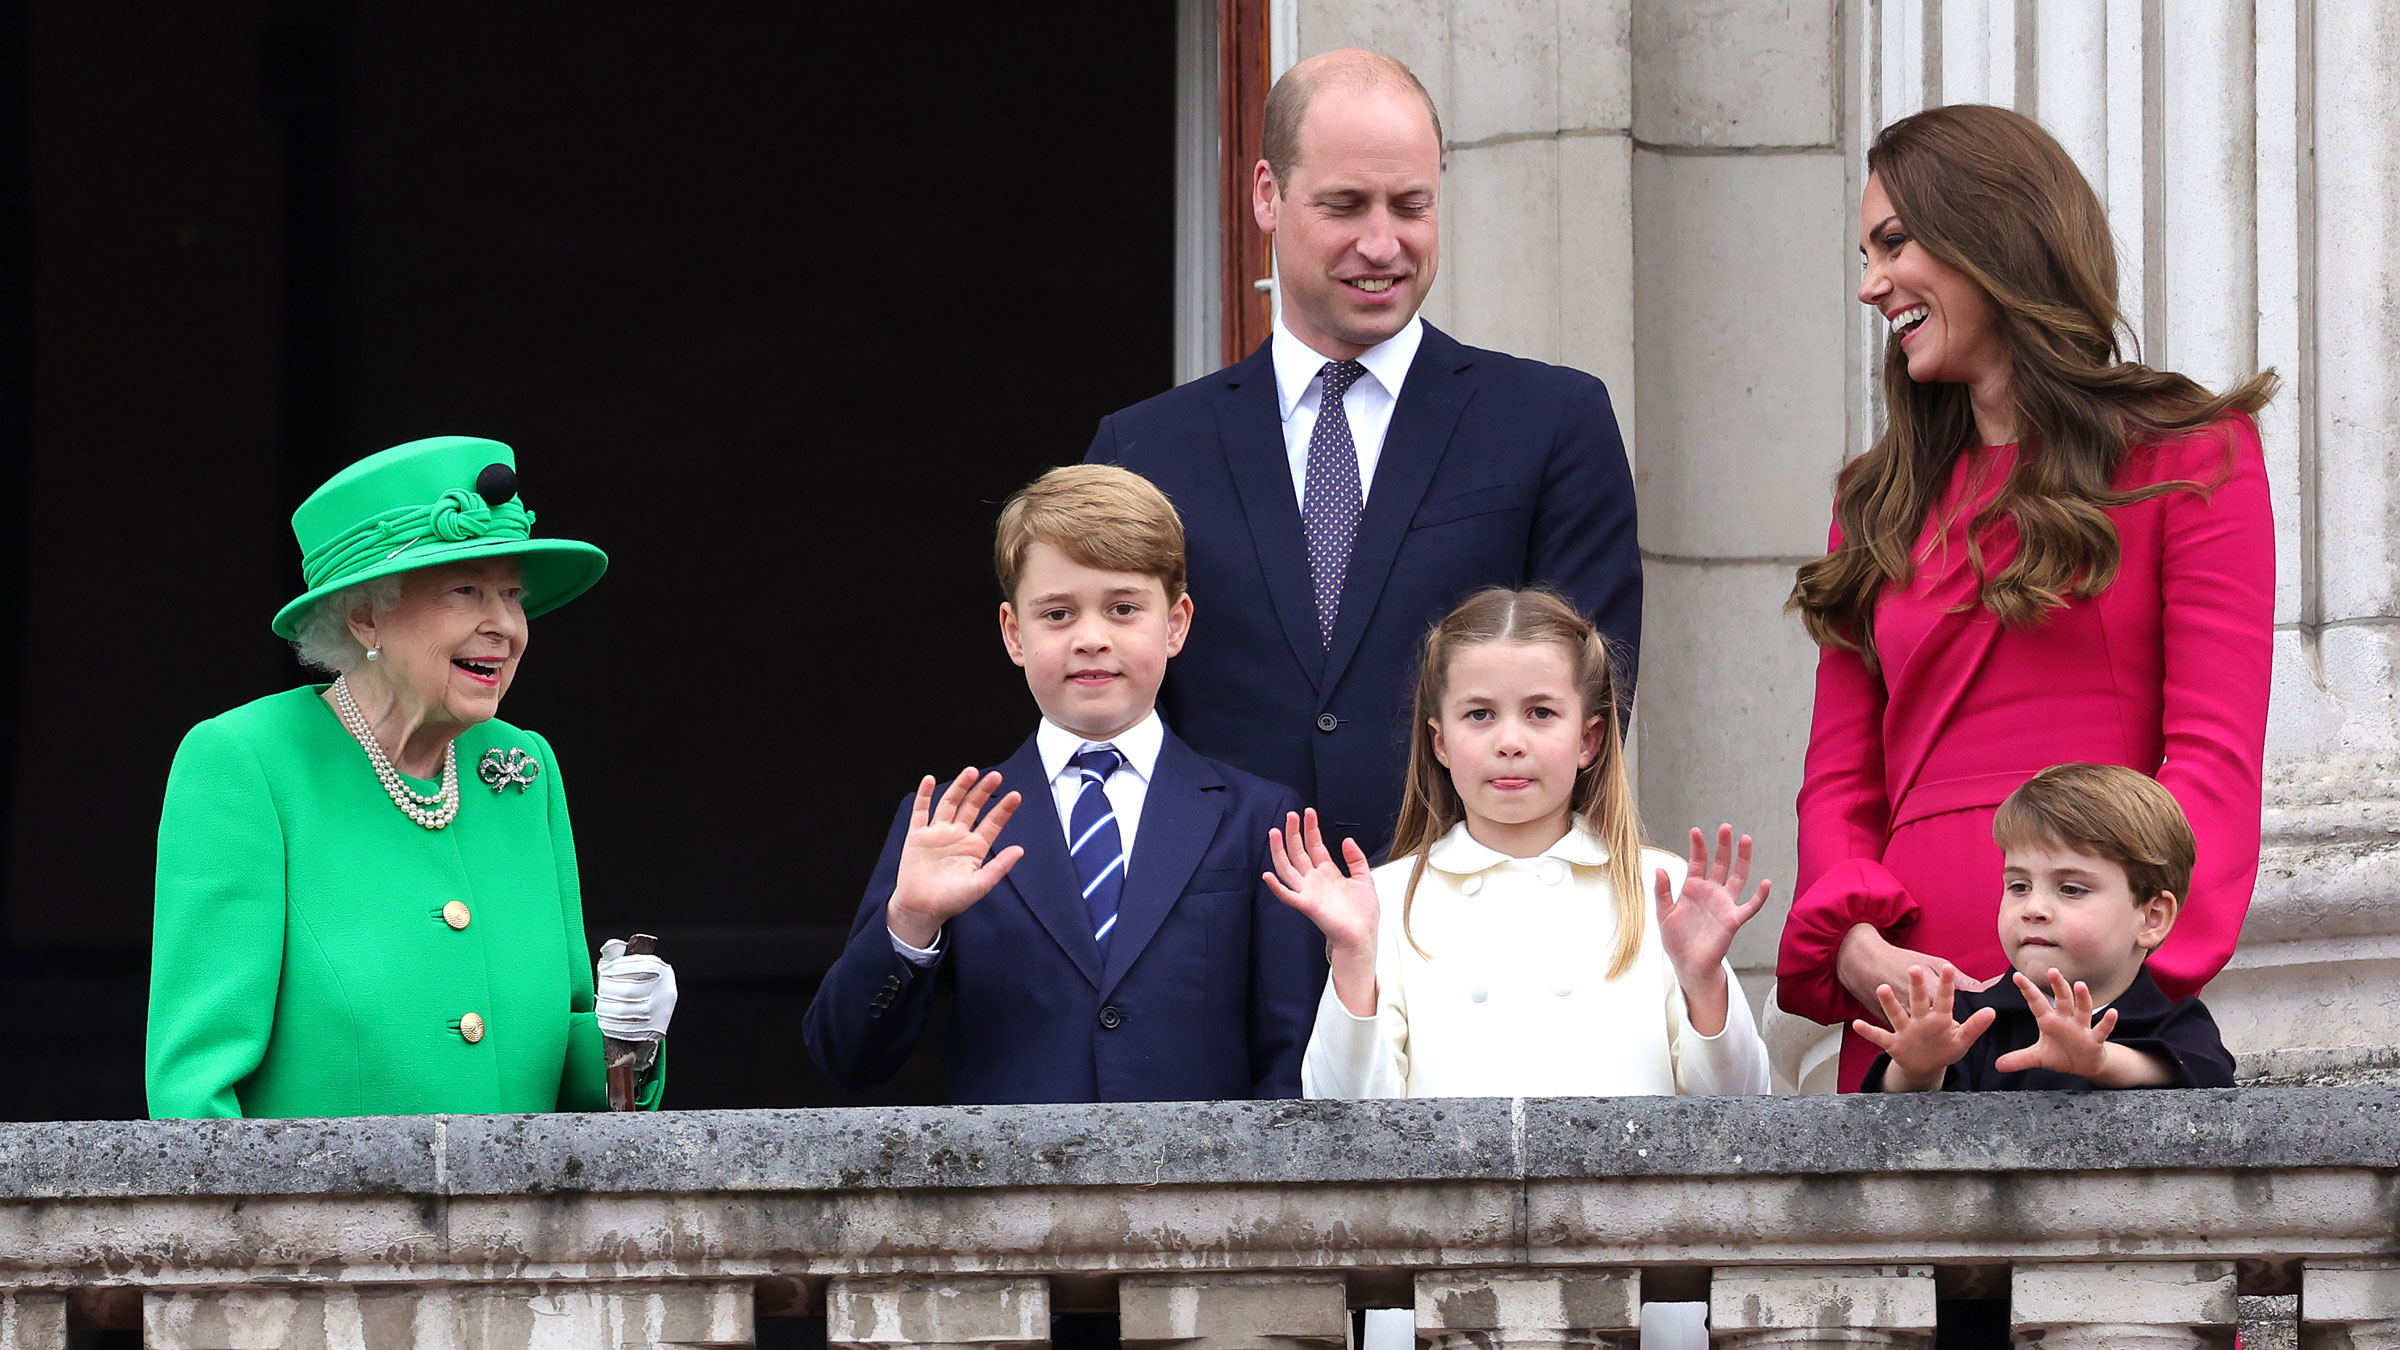 In this photo from June, Queen Elizabeth II joins Prince William; his wife, Catherine; and their three children -- George, Charlotte and Louis -- on the balcony of Buckingham Palace.